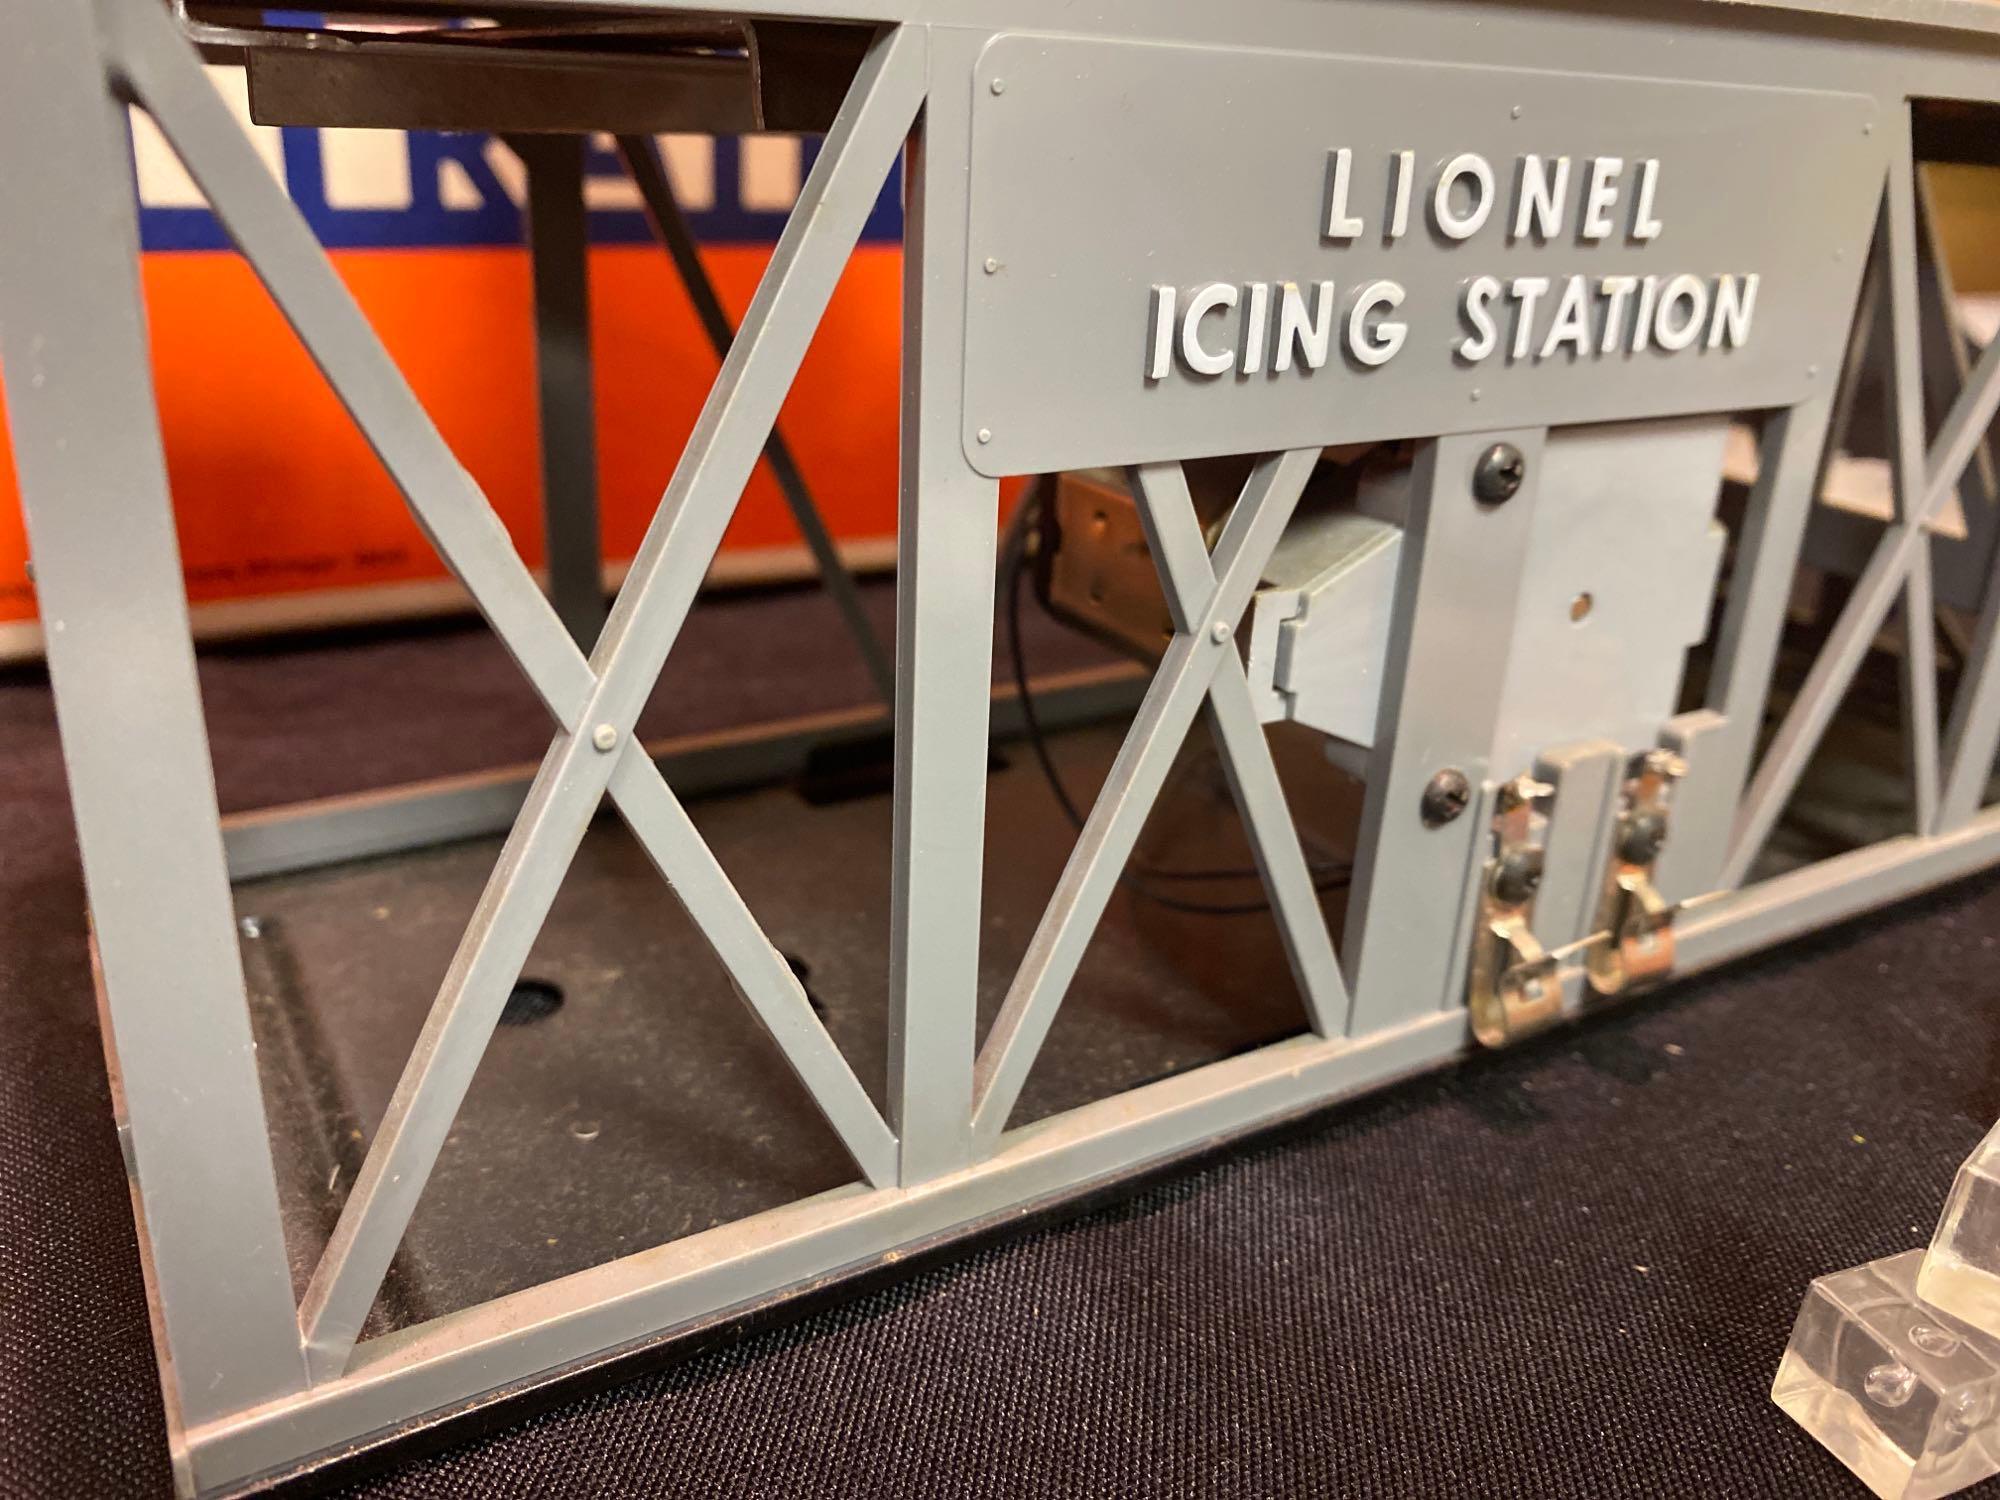 Lionel Icing Station & Burning Switch Tower